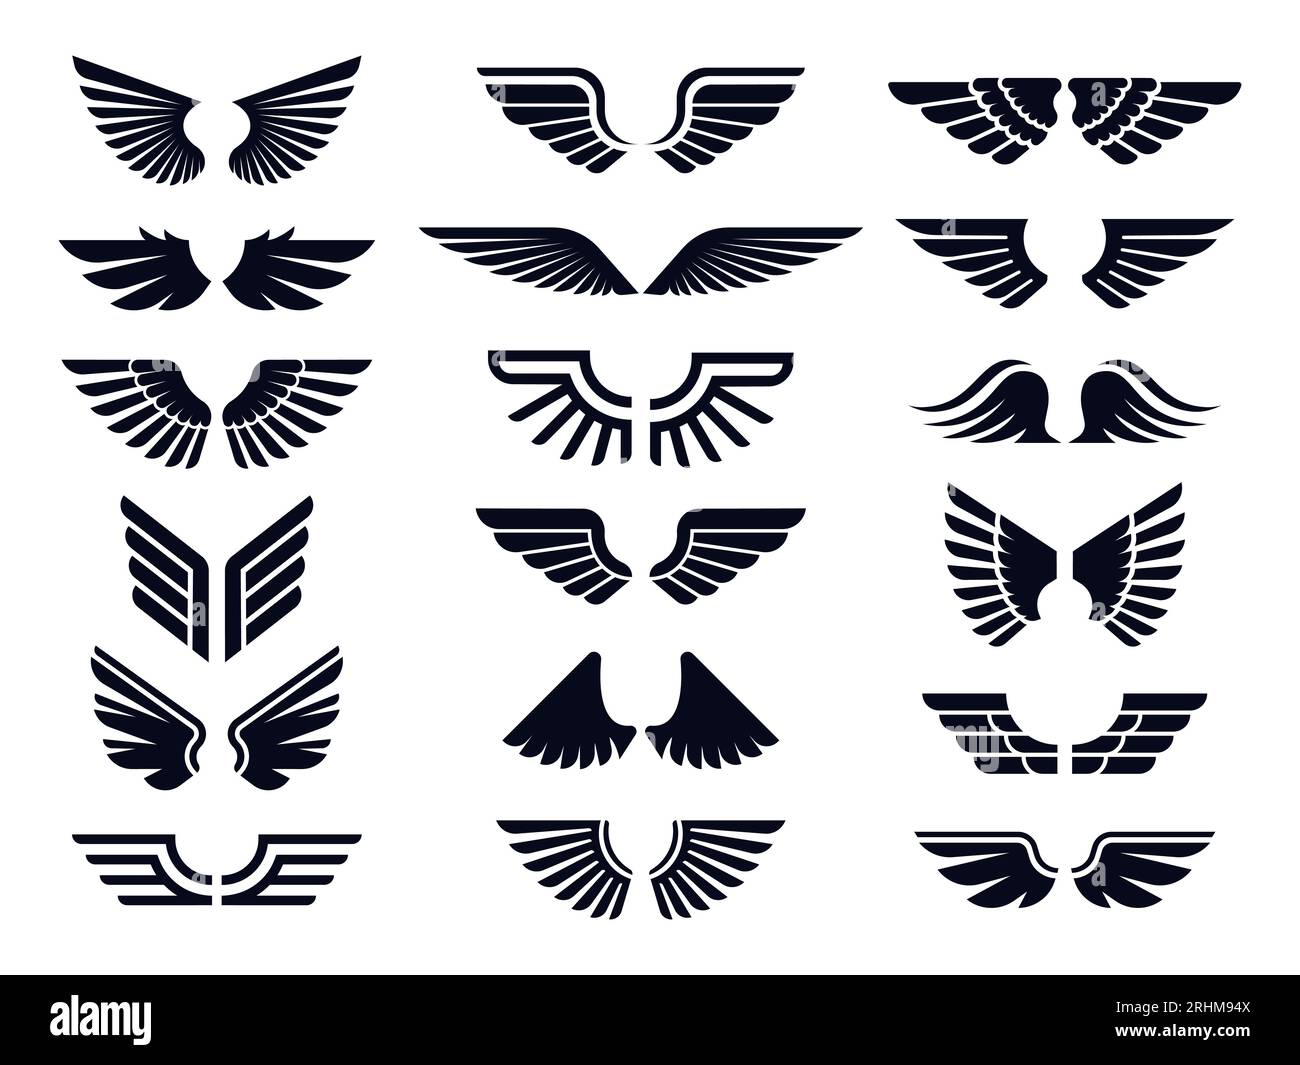 Silhouette pair of wings icon. Angel wing, decorative fly emblem and ...